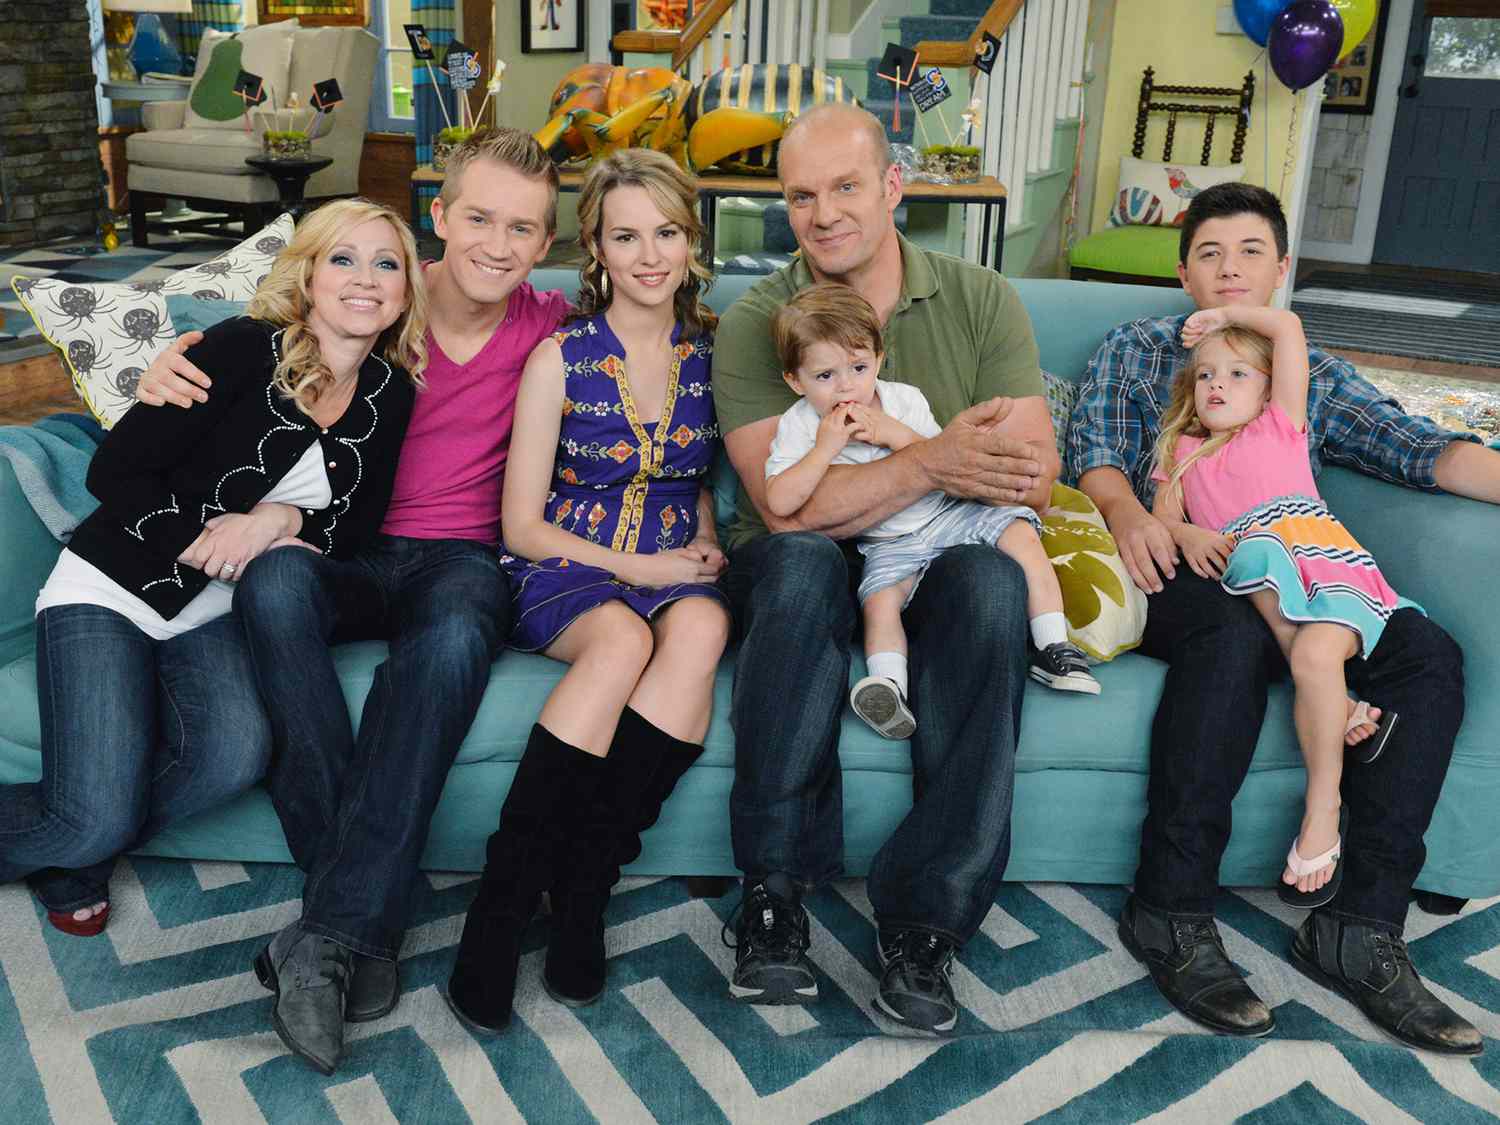 The Timeless Charm of “Good Luck Charlie”: A Look Back and Ahead